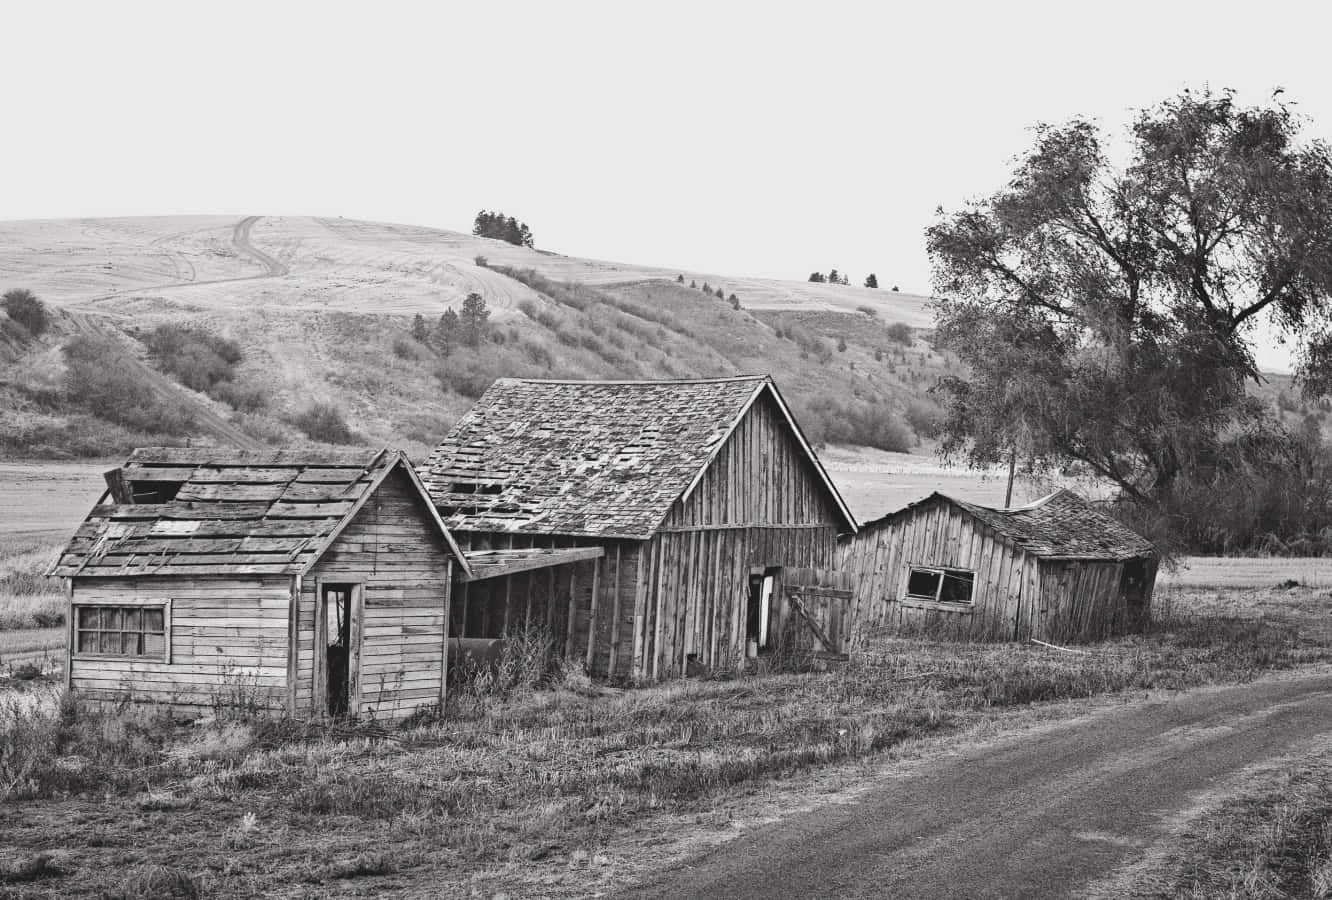 A View of an Old Country Farm